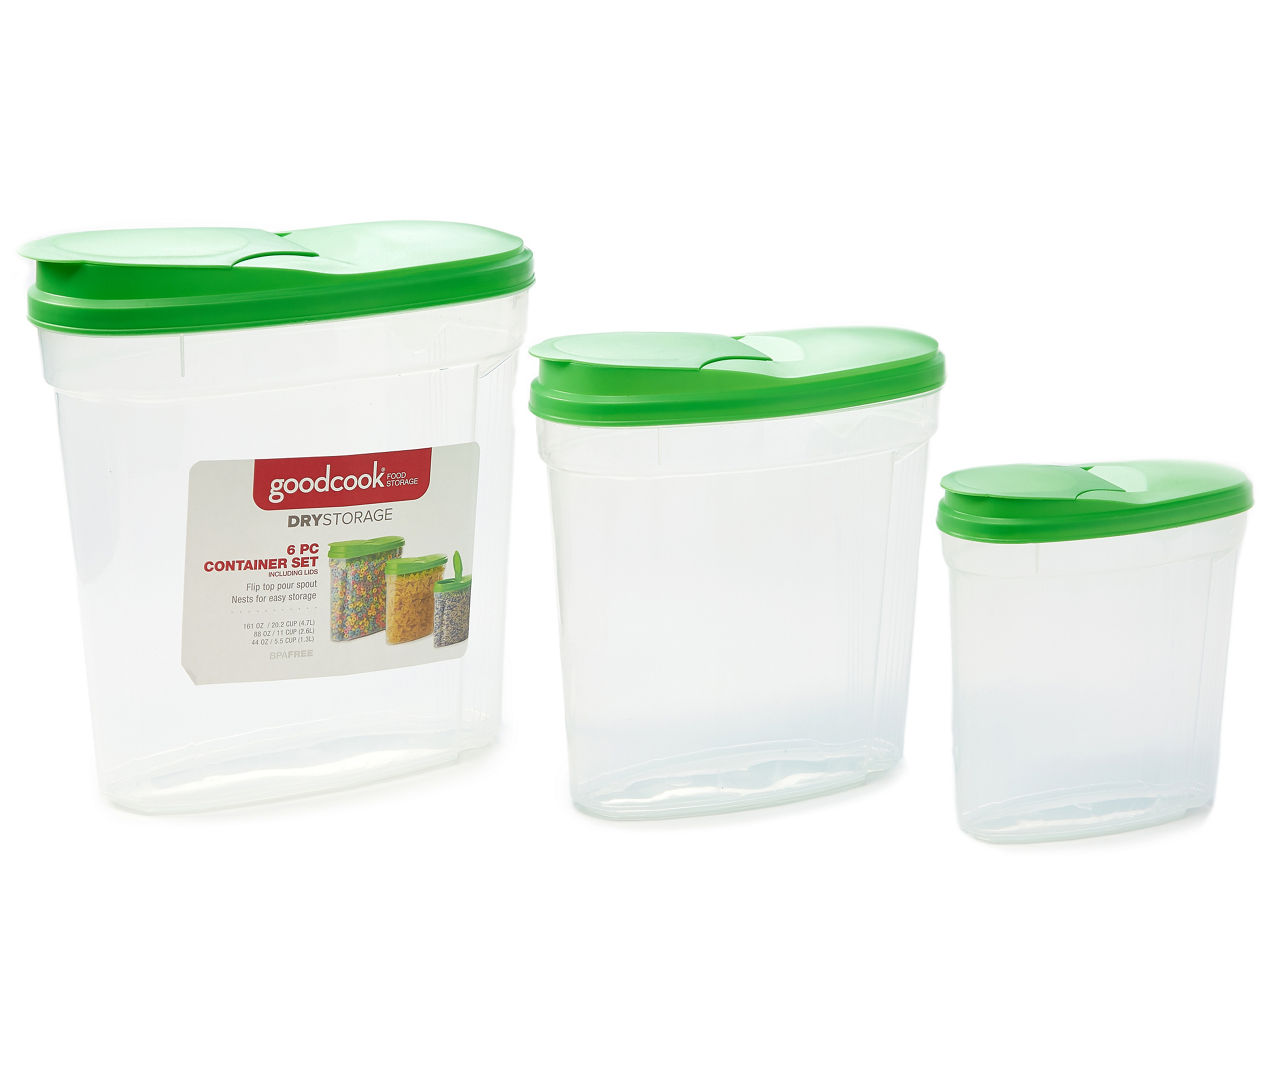 Goodcook Food Storage Containers, 16 Piece Value Pack